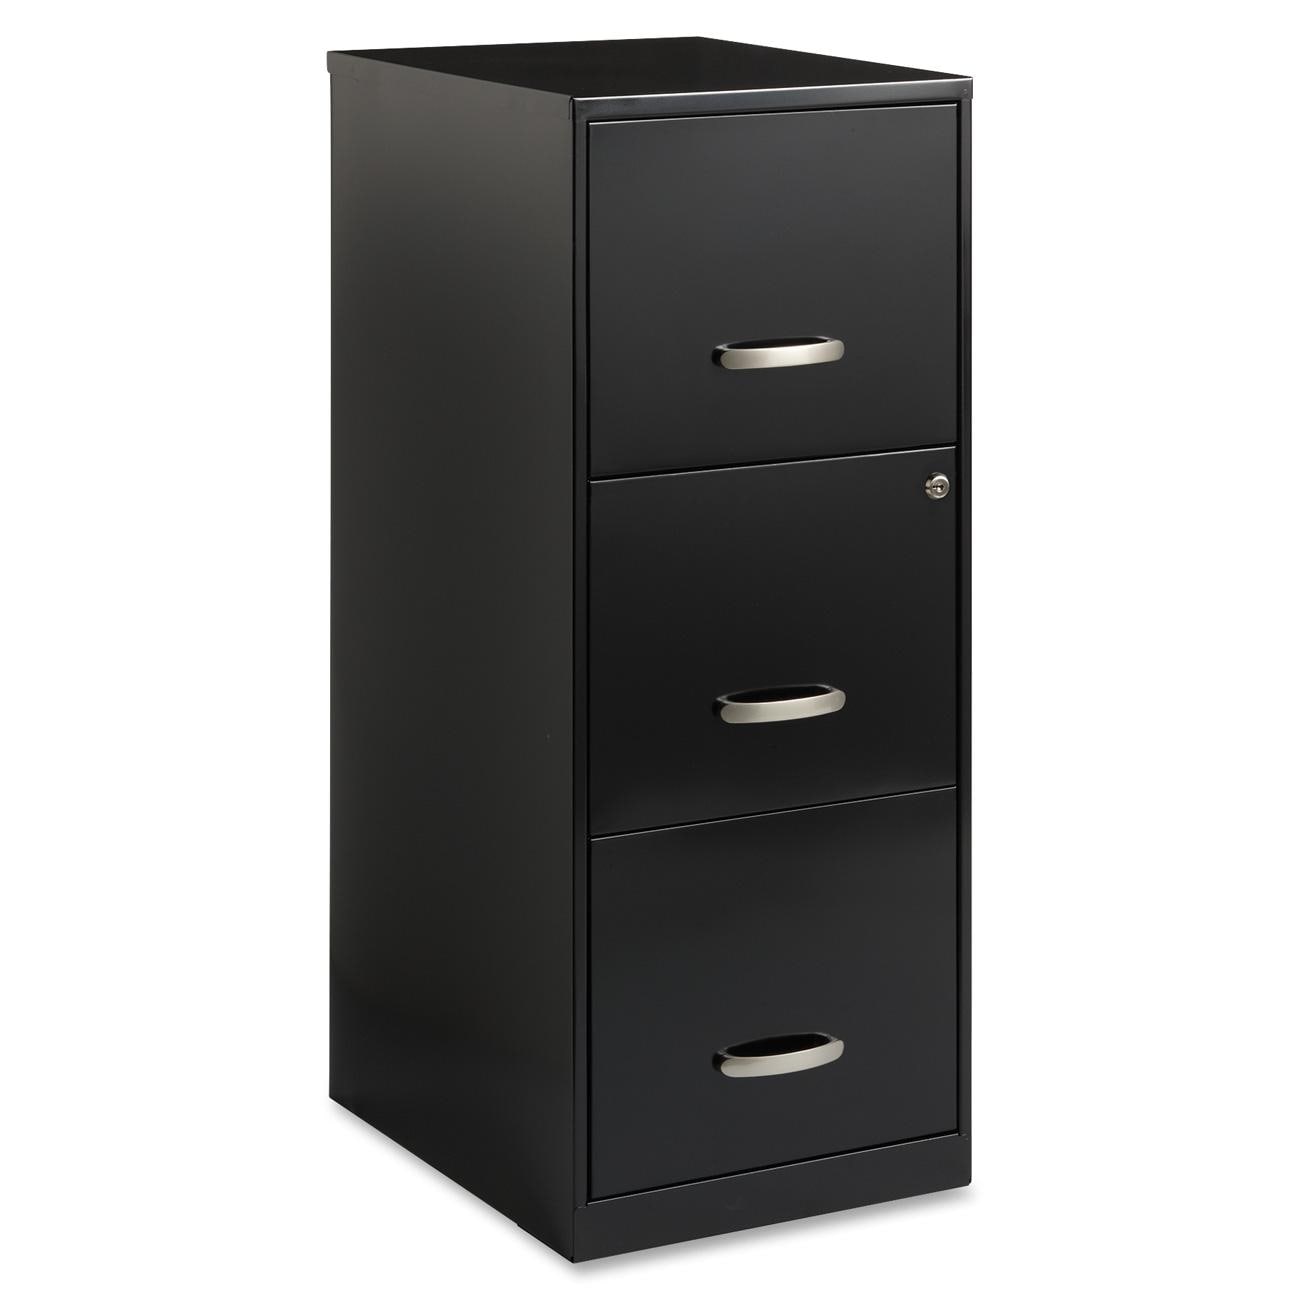 Lateral File Cabinet with Lock 2 Drawer Black Lateral Filing Cabinet Metal Steel Black File Cabinets for Home Office INTERGREAT 